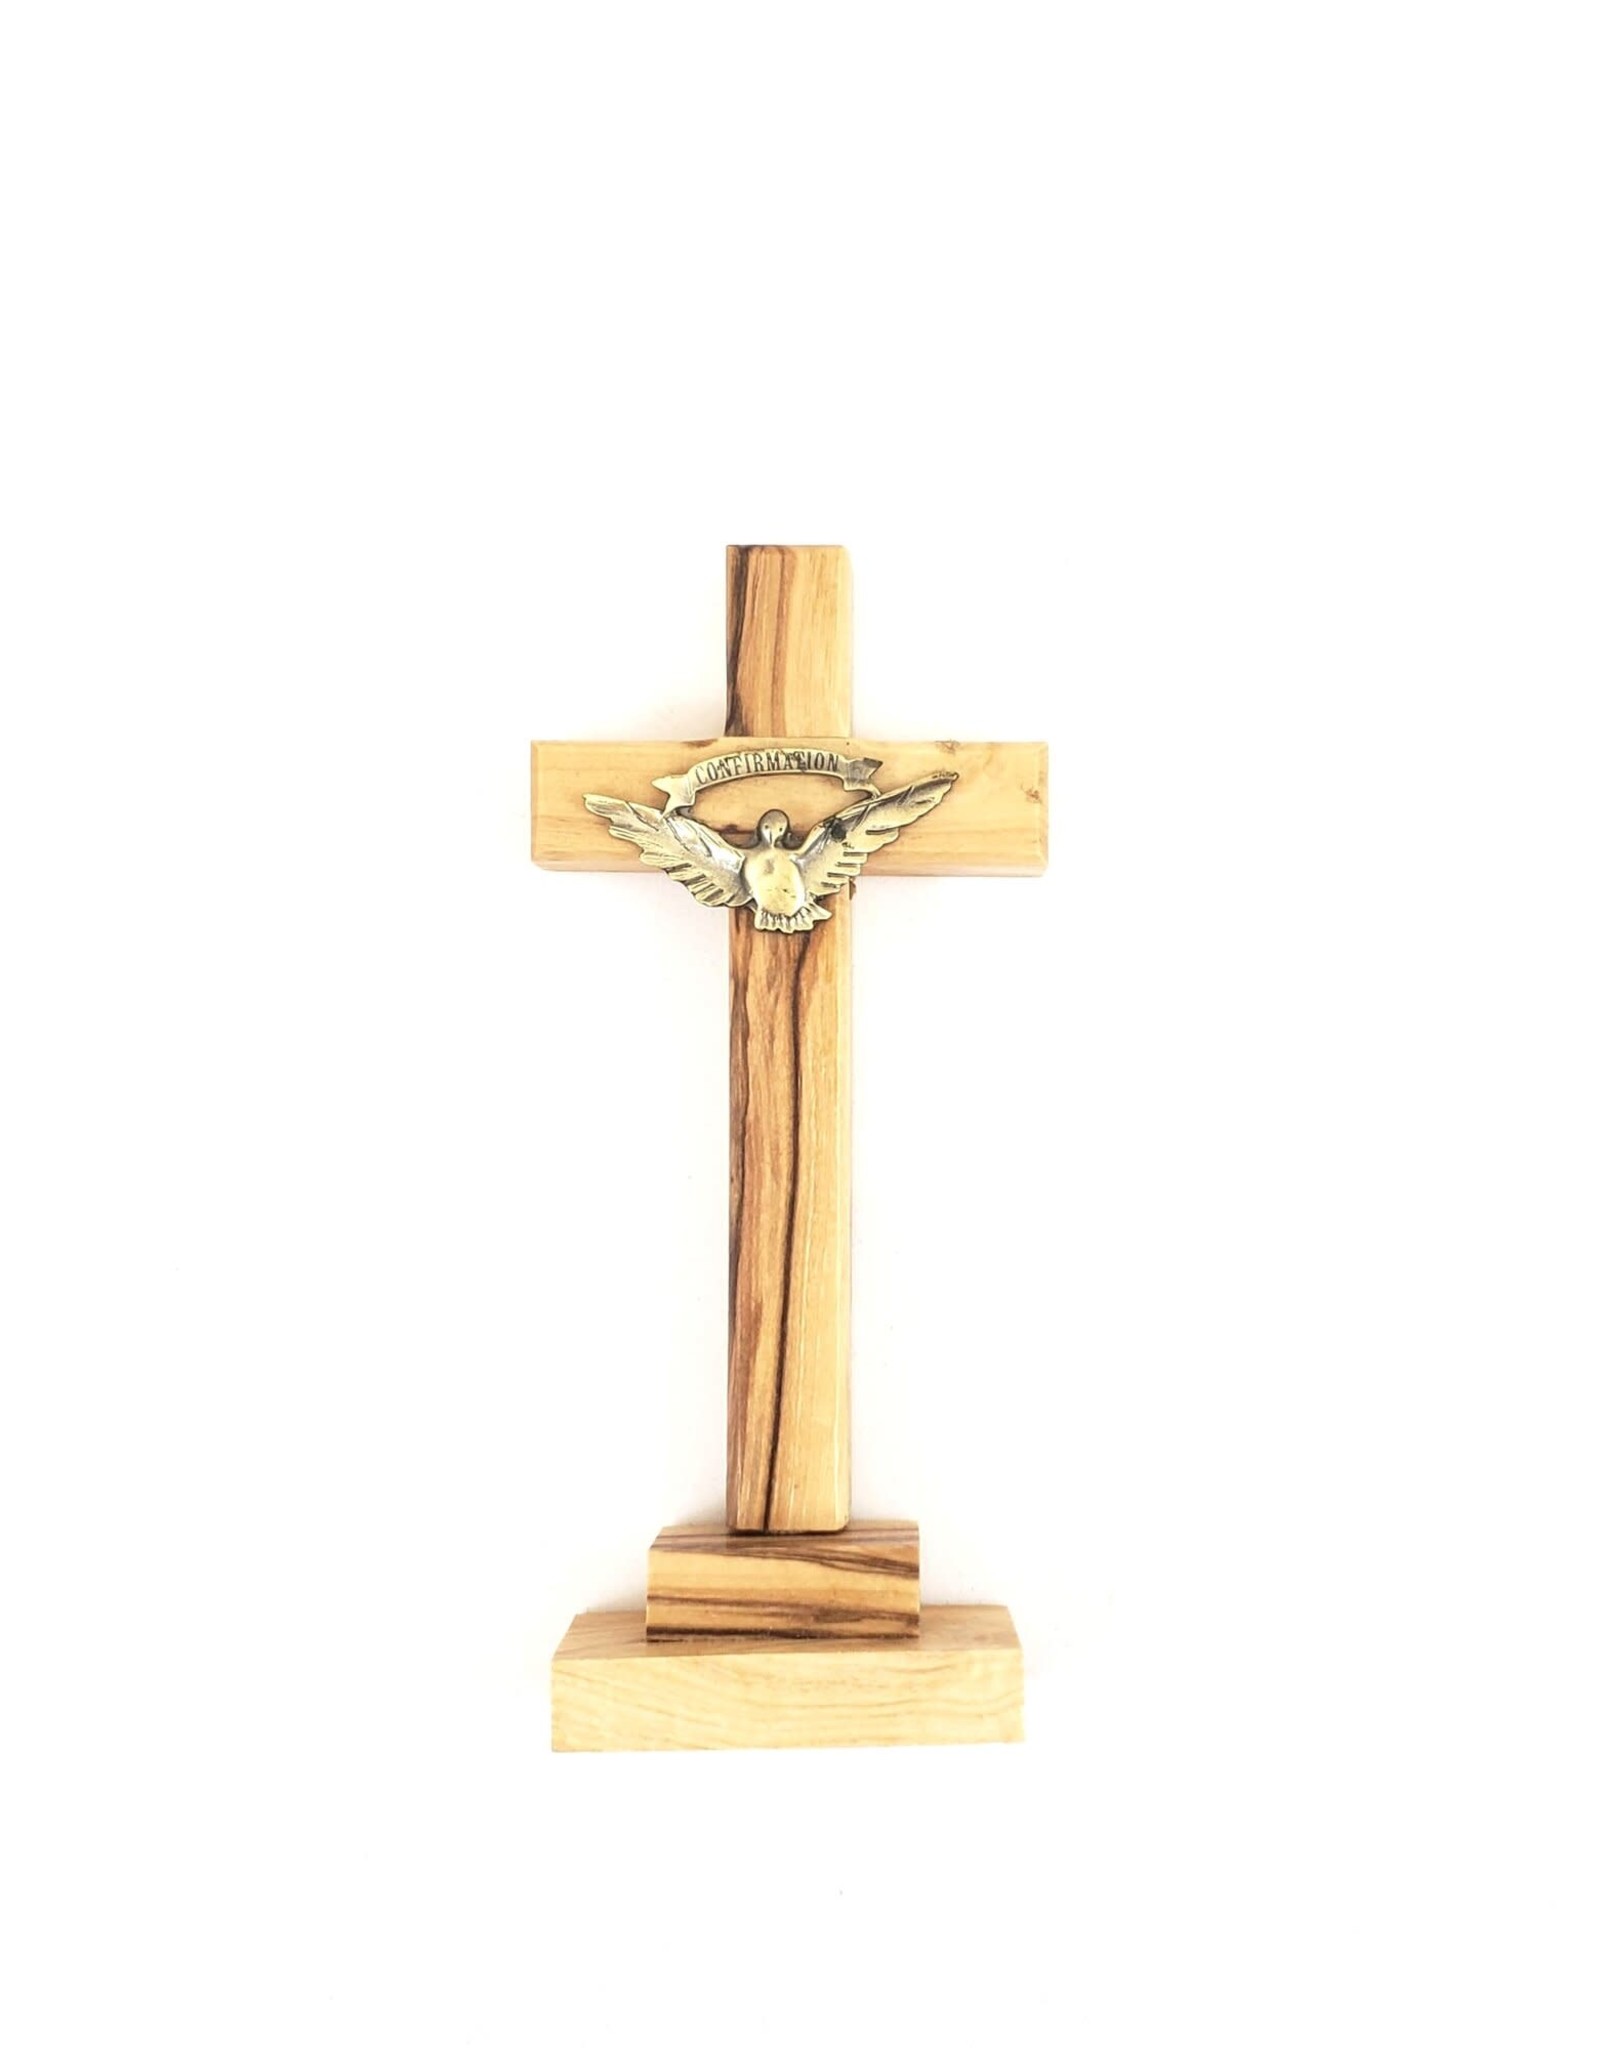 Shomali Confirmation Cross - Standing, made with Olive Wood from the Holy Land (5")